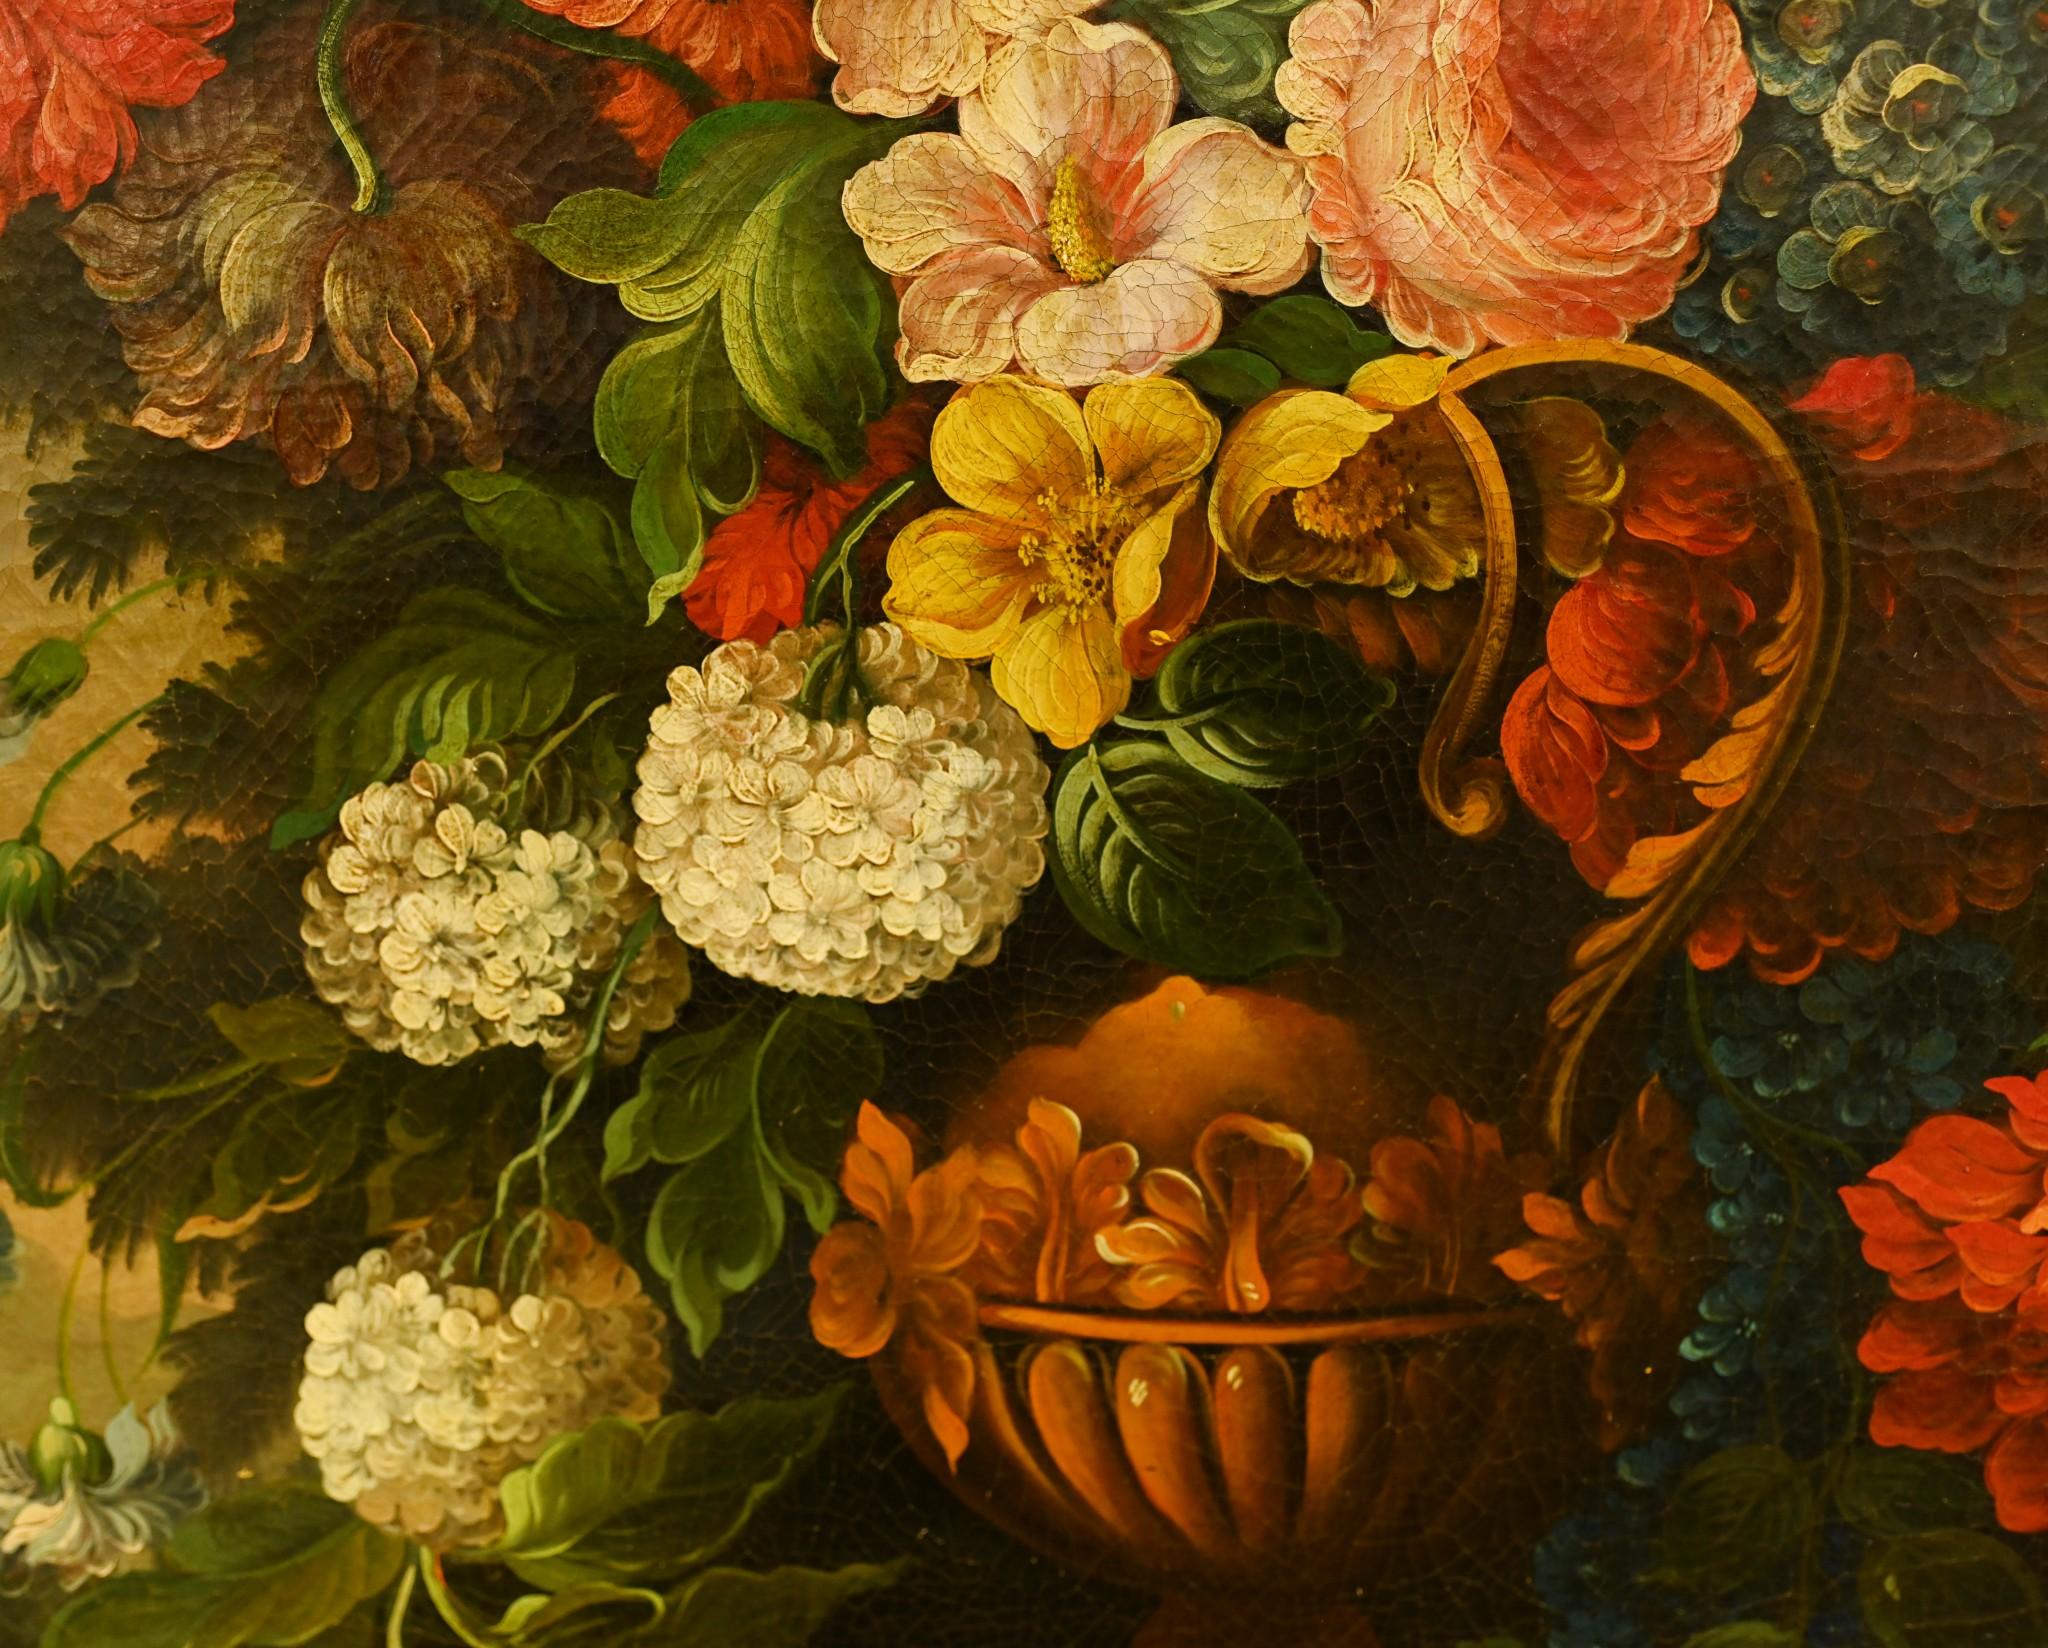 Stunning work of art in the form of an antique Flemish still life Good size at four feet tall - 121 CM
Such a vivid piece with the colourful flowers overflowing from the campana urn
Will add life and vitality to any room
Piece is signed in bottom